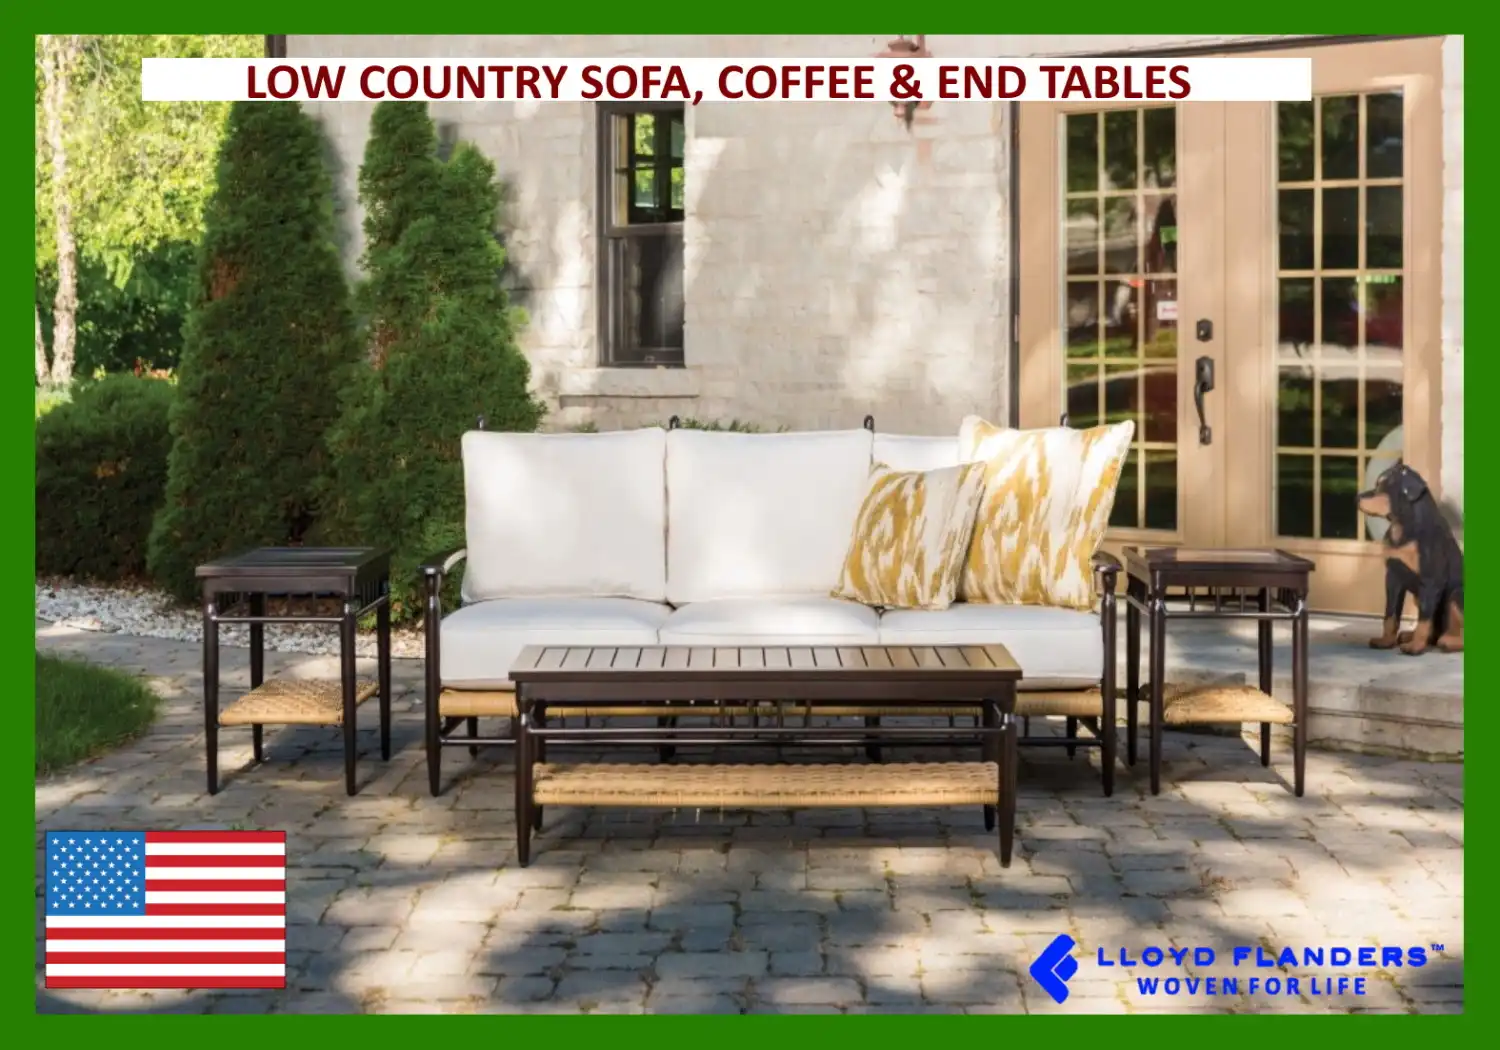 LOW COUNTRY SOFA, COFFEE & END TABLES